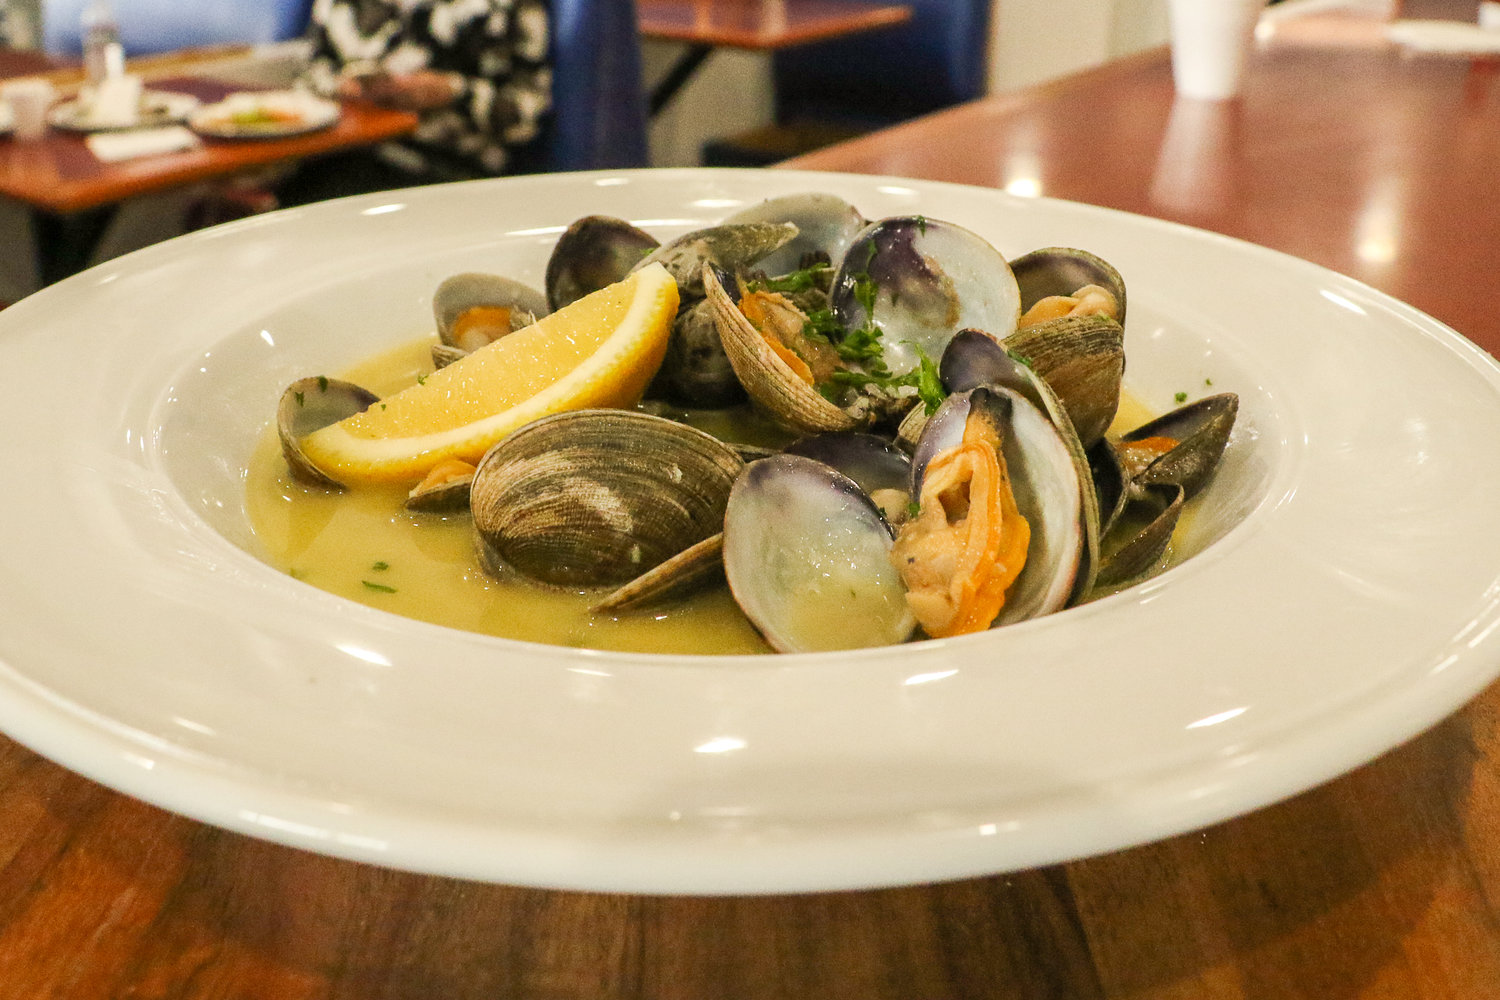 Clams in butter sauce are served up for sampling by Chef Eyner "Rene" Cardona at his new restaurant in Chehalis, Ocean Prime.